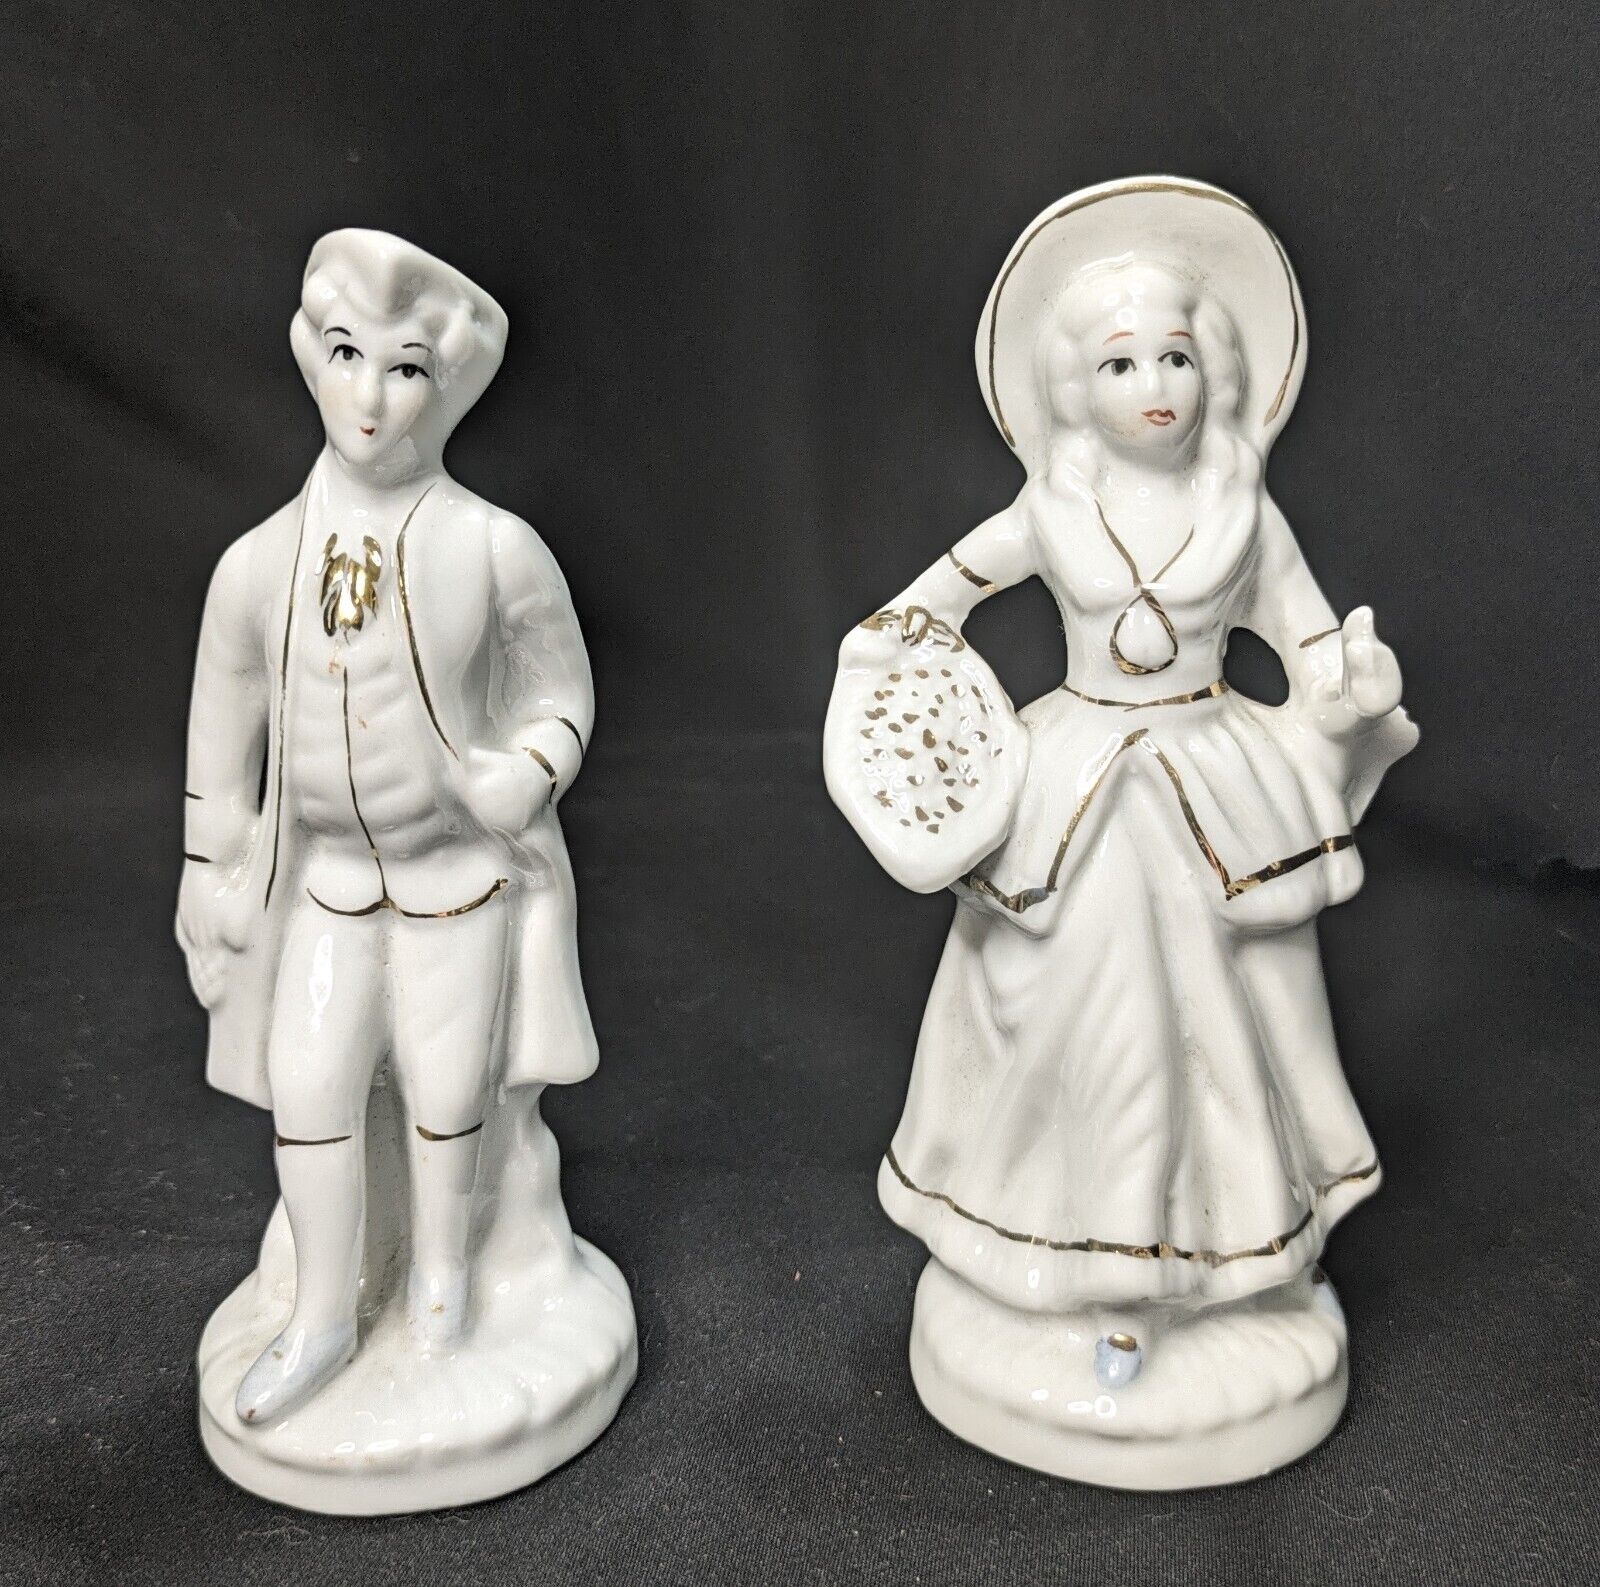 Vintage Hand Made Porcelain Victorian Figurines Man/Woman - One Of A Kind 